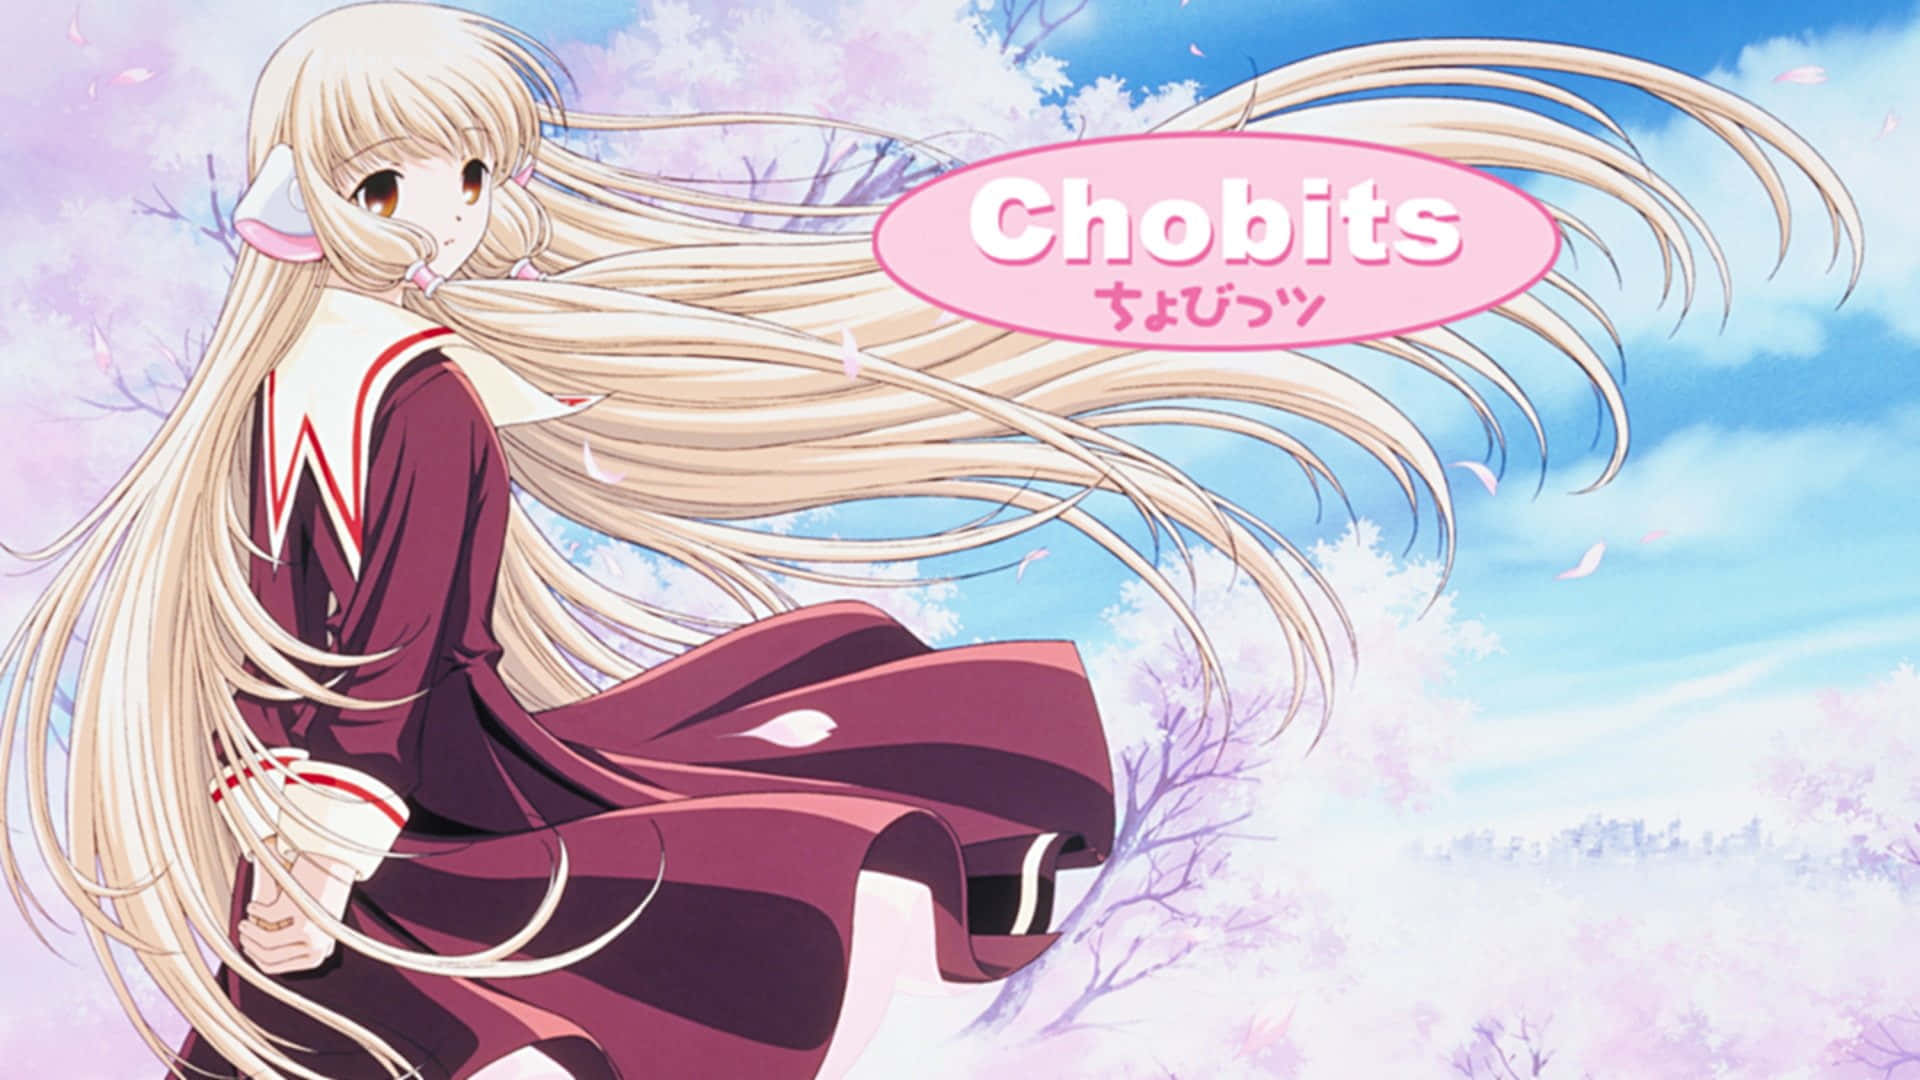 Chobits - A View Into the Beautiful and Mysterious